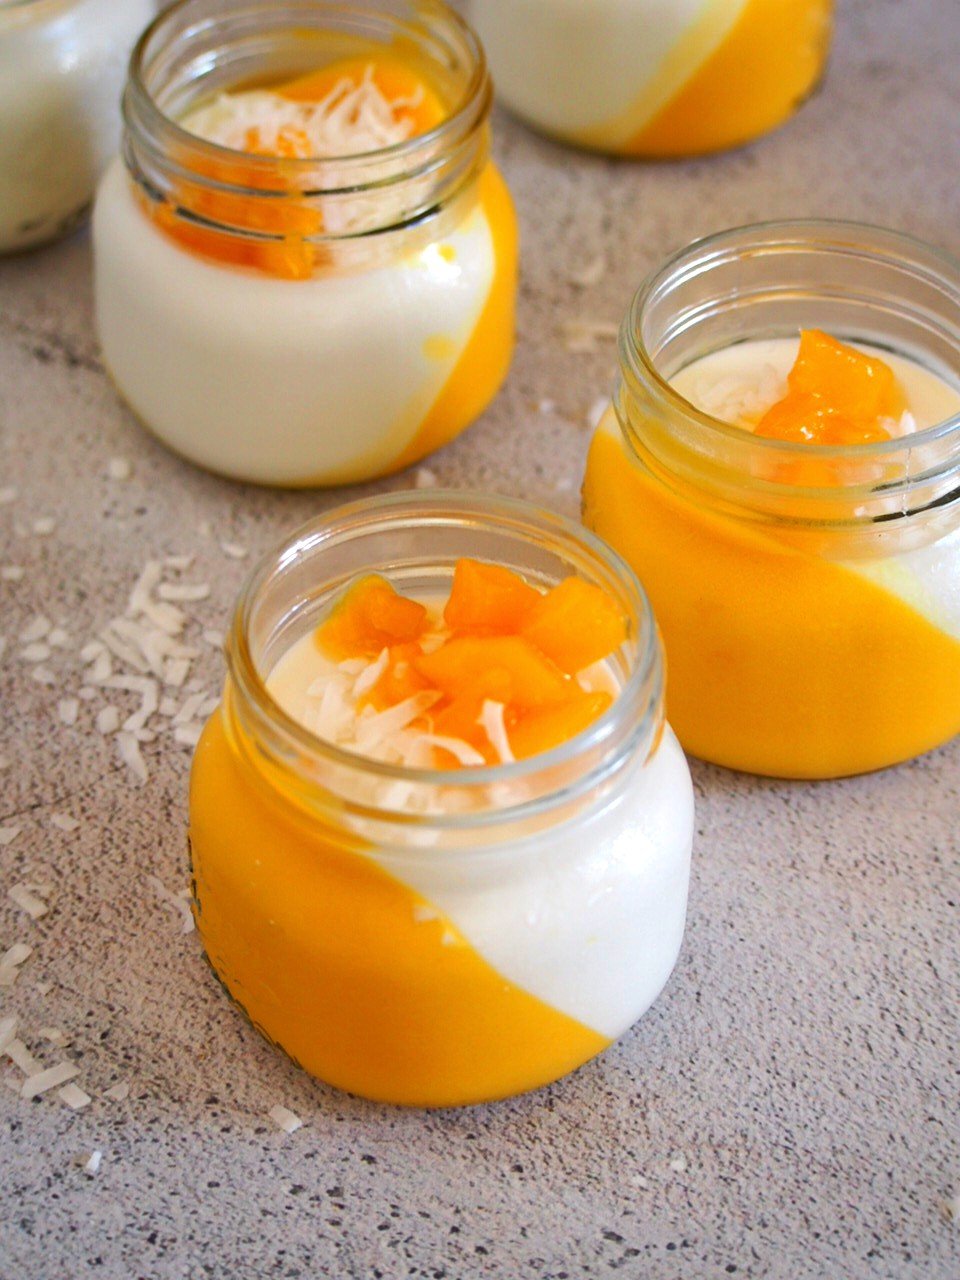 The coconut mango panna cotta with caramelized mangoes and flaked coconut.